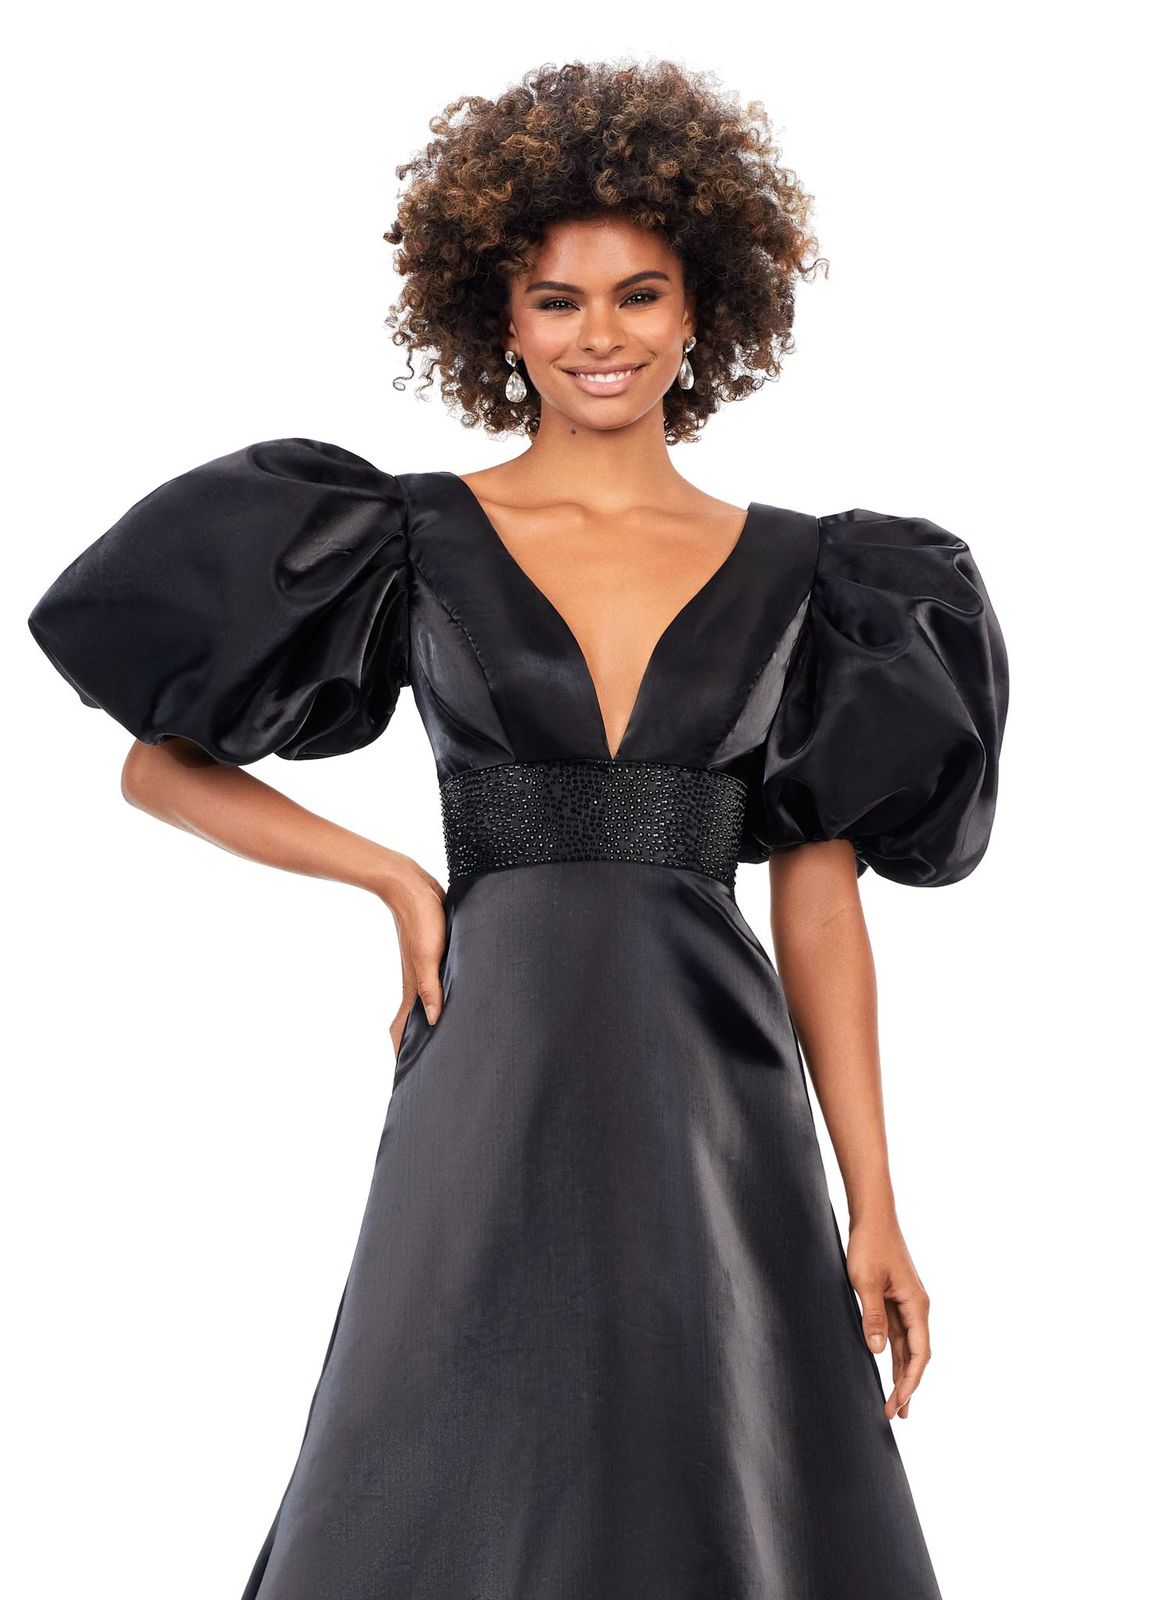 Ashley Lauren 11378 This elegant a-line gown features a heat set detailed waistband and oversized puff sleeves. With a v-neckline and v-back, this gown is the perfect mesh of elegant and fun! V-Neckline Oversized Puff Sleeves A-Line Skirt Shimmer Satin COLORS: Black, Red, White